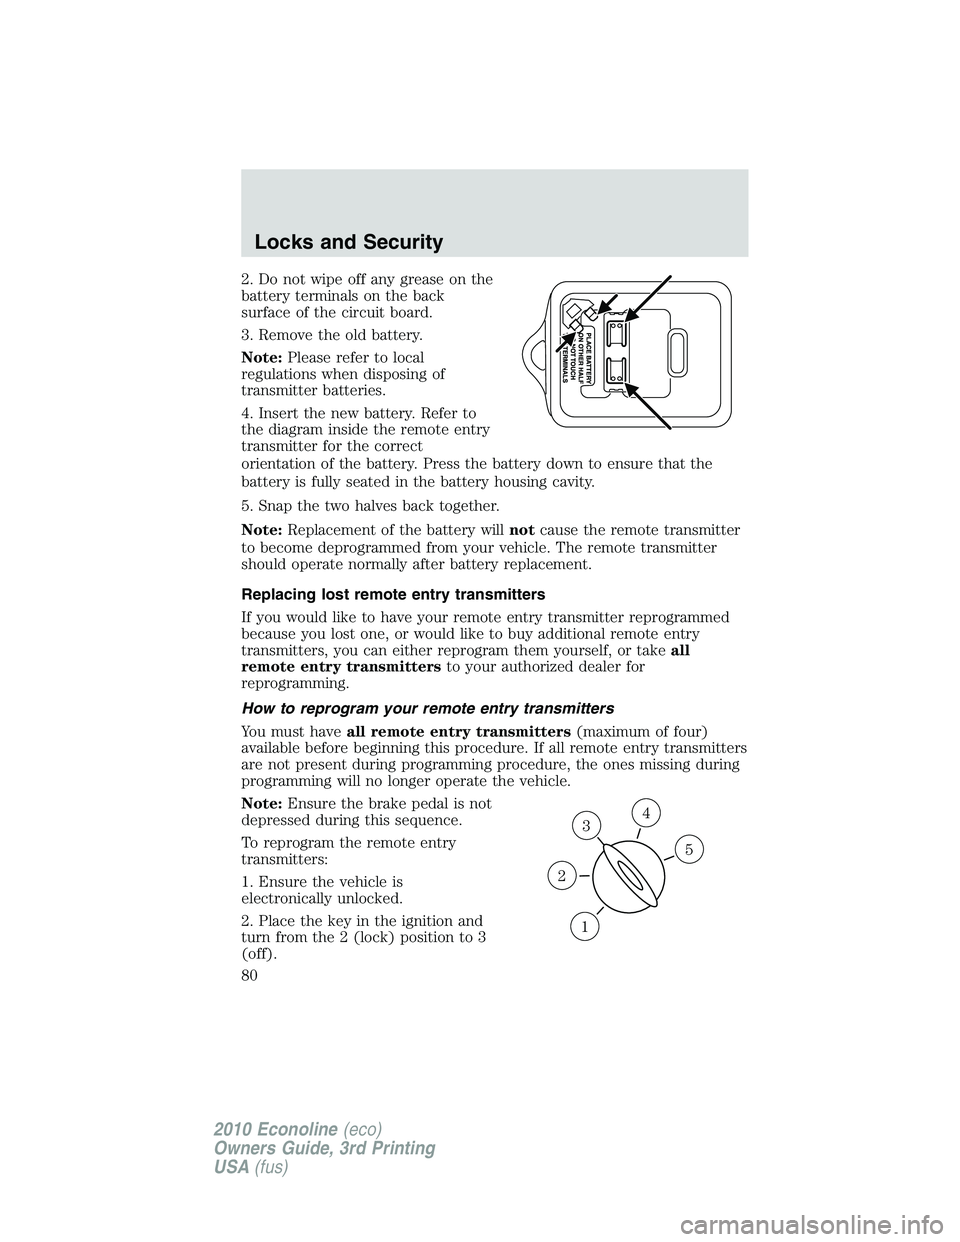 FORD E450 2010  Owners Manual 2. Do not wipe off any grease on the
battery terminals on the back
surface of the circuit board.
3. Remove the old battery.
Note:Please refer to local
regulations when disposing of
transmitter batteri